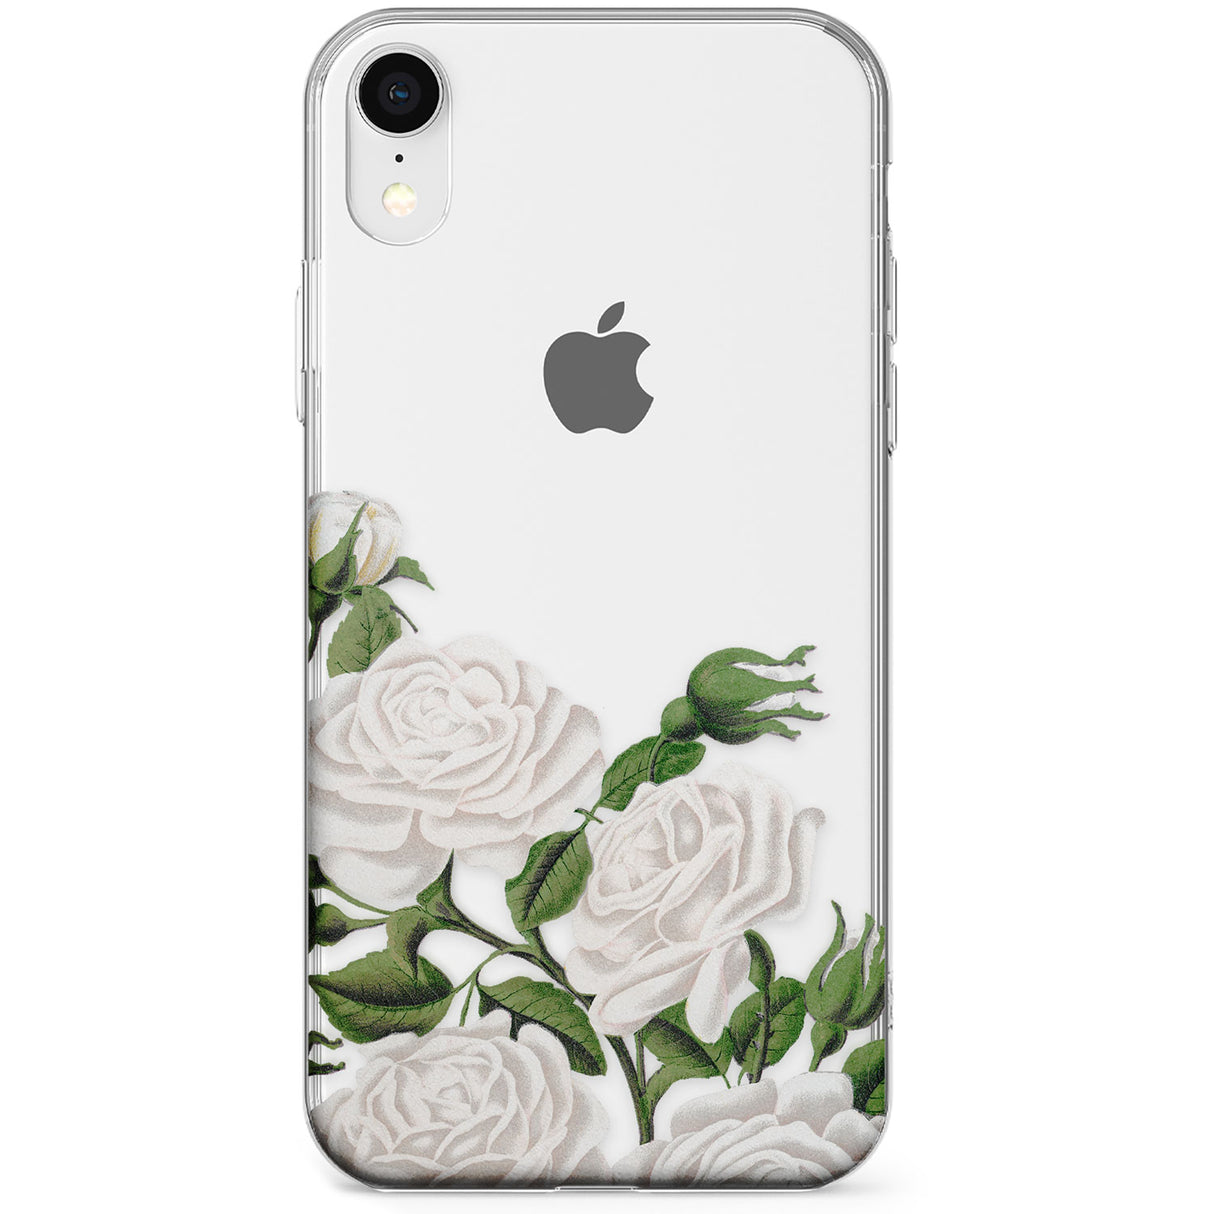 White Vintage Painted Flowers Phone Case for iPhone X, XS Max, XR